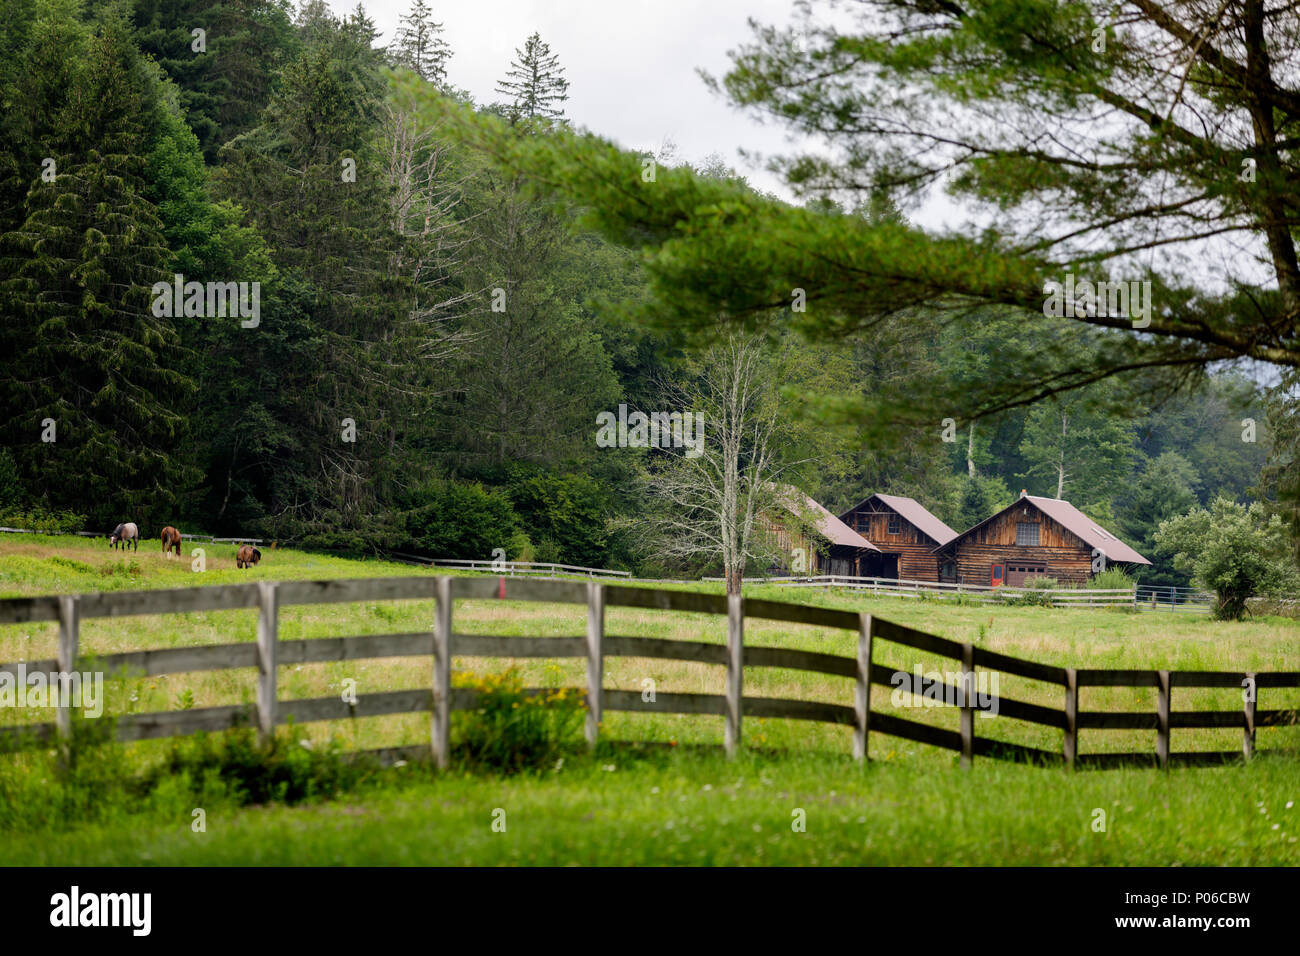 CATSKILLS, NY/USA - JULY 23, 2017: Bucolic summer scene in the Catskill Mountains, complete with horses and rustic farm. Stock Photo